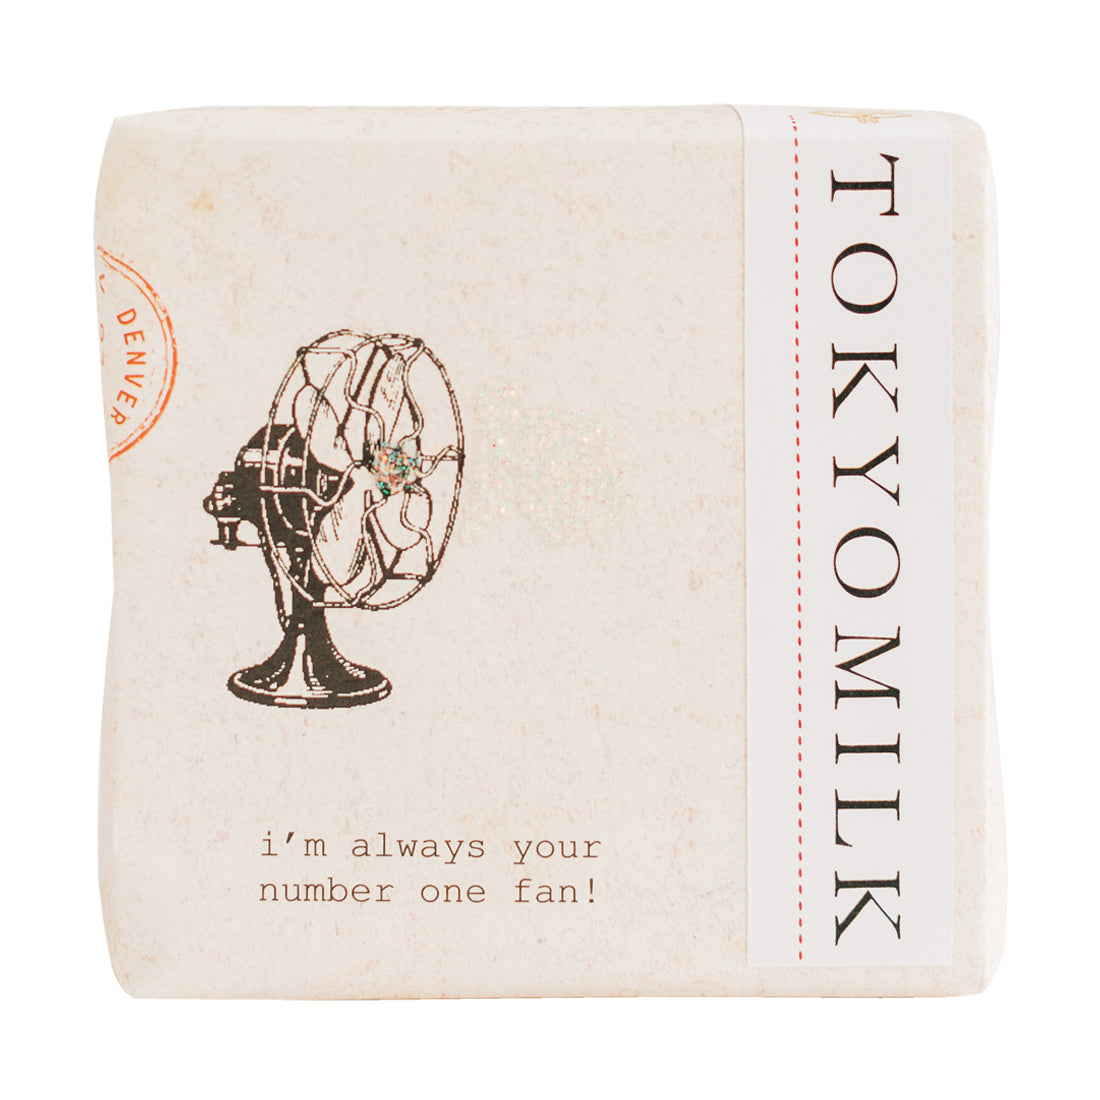 A vintage-style postcard featuring an illustration of an old desk fan. The text on the card reads "I'm always your number one fan!" with decorative borders and Margot Elena's TokyoMilk Finest Perfumed Soap - Always Your #1 Fan stamp.